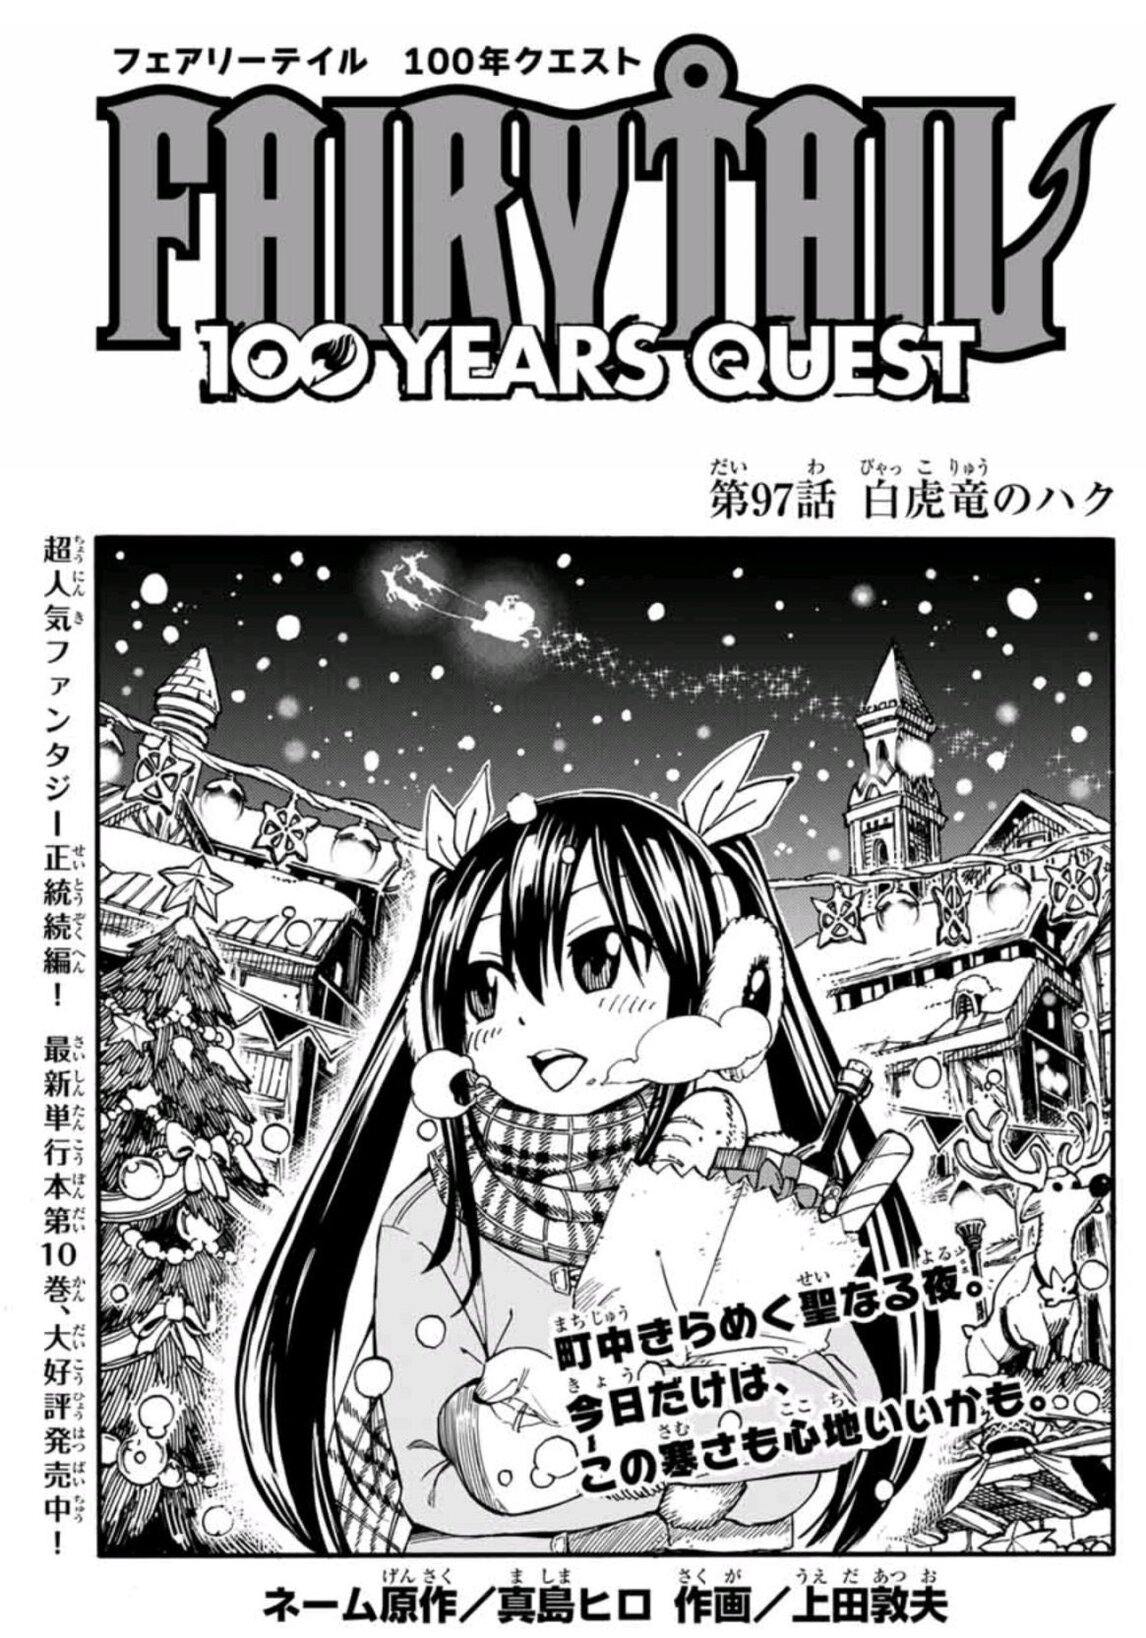 Fairy Tail: 100 Years Quest Chapter 97 | Fairy Tail Wiki | Fandom